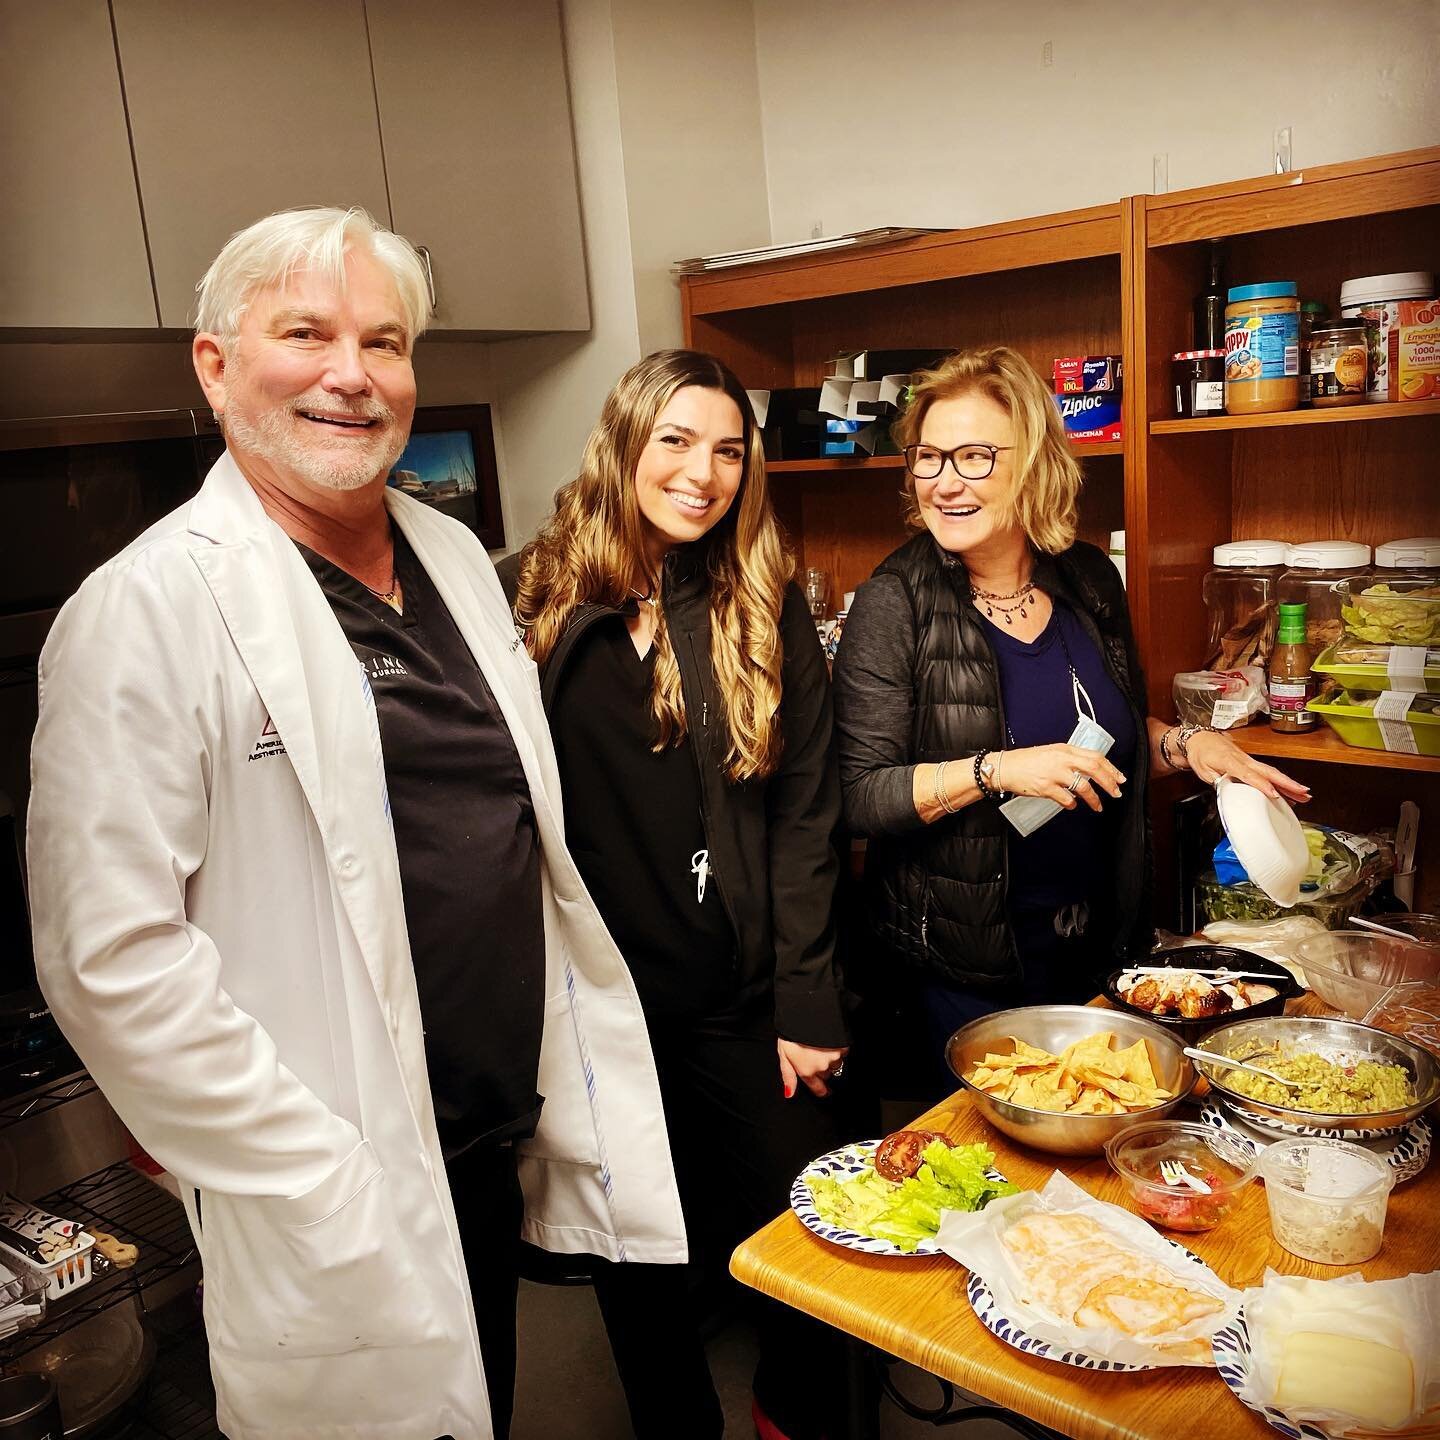 Hope everyone had a wonderful Thanksgiving! We&rsquo;re feeling extra gratitude for the amazing people on every rotation that keep us well-fed and supported, like the staff at @marinaplasticsurgery and @drgrantstevens ! We can always count on Irma fo